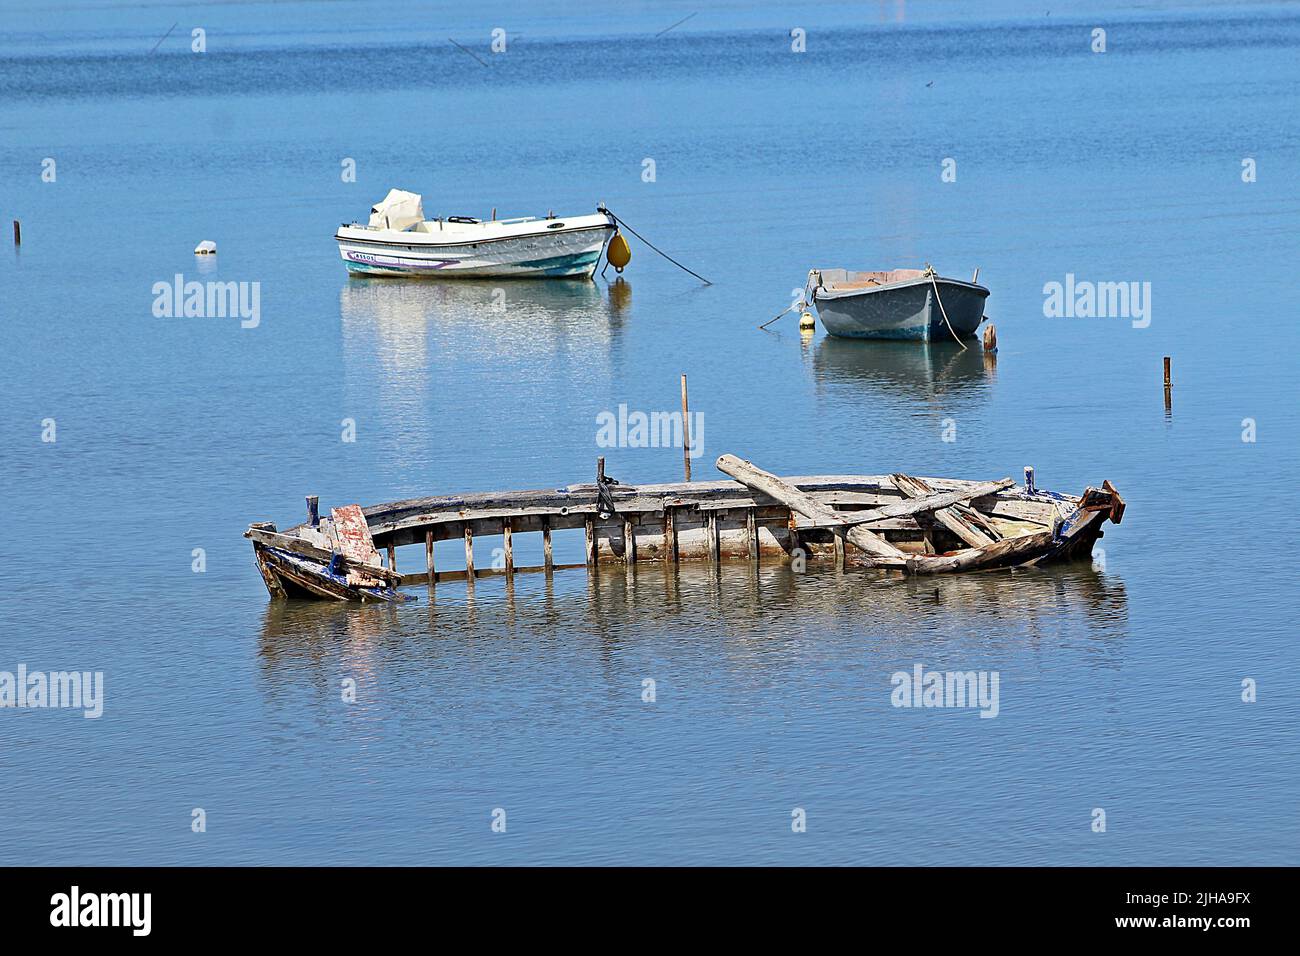 KANONI, CORFU, GREECE - SEPTEMBER 13, 2017 rotting skeleton of a traditional wooden row boat in clear blue water with modern boats in the background Stock Photo